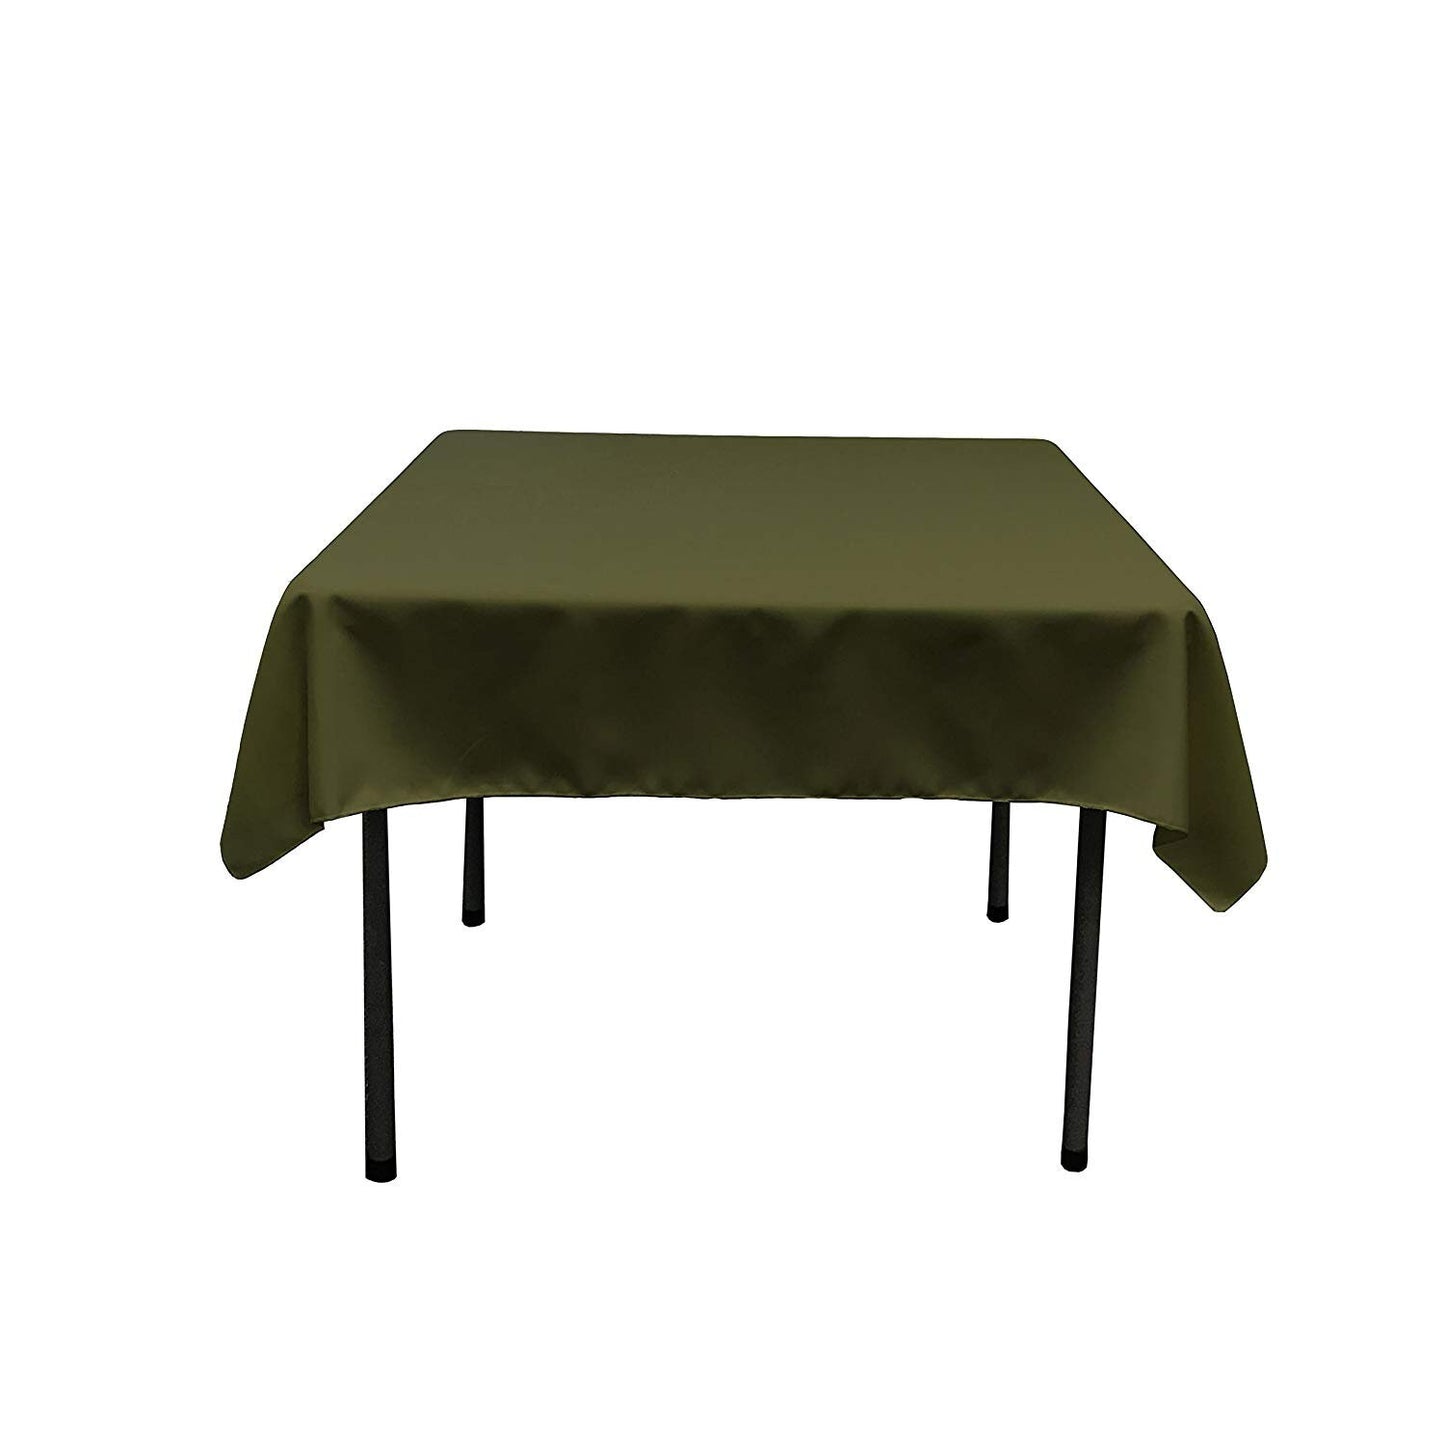 54 x 54-Inch Seamless Olive Green Rectangular Polyester Tablecloth for Wedding Party Decorations Square Table Cloth Cover